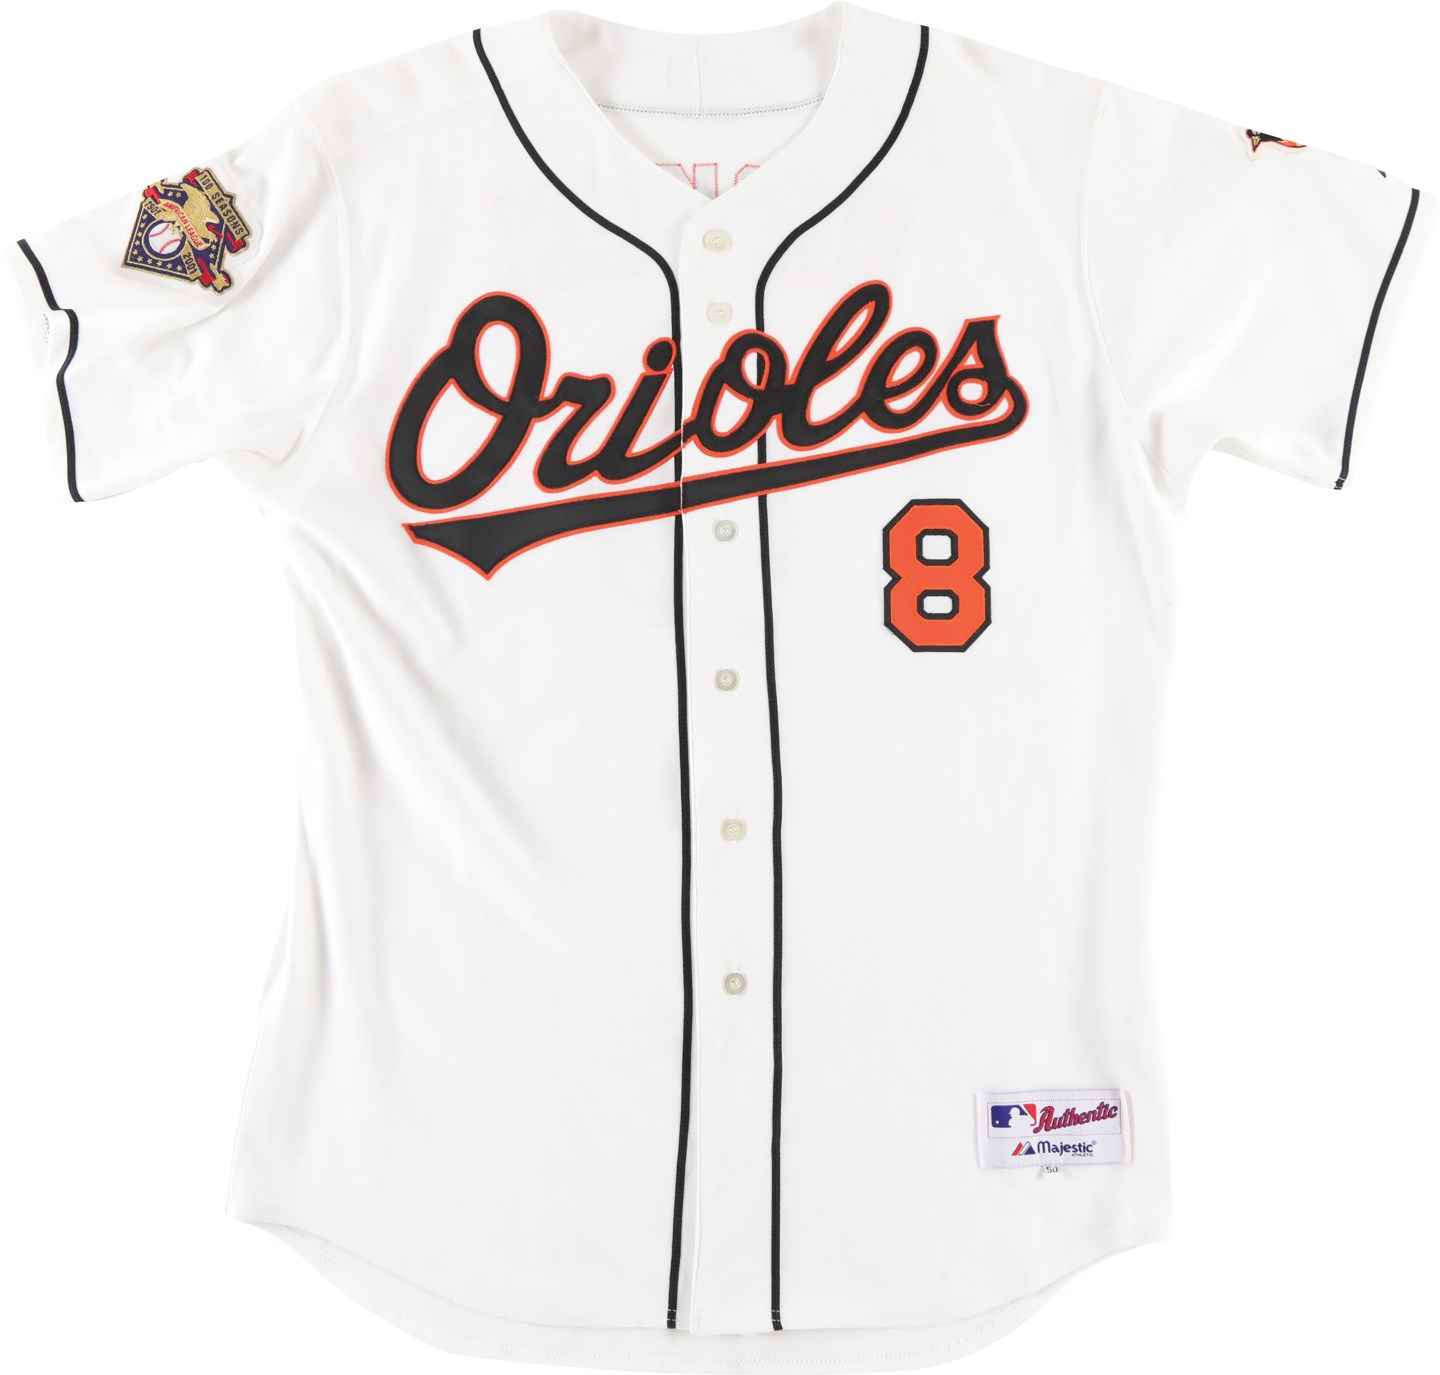 - 2001 Cal Ripken Jr. Baltimore Orioles Signed Professional Model Jersey Gifted to Cito Gaston